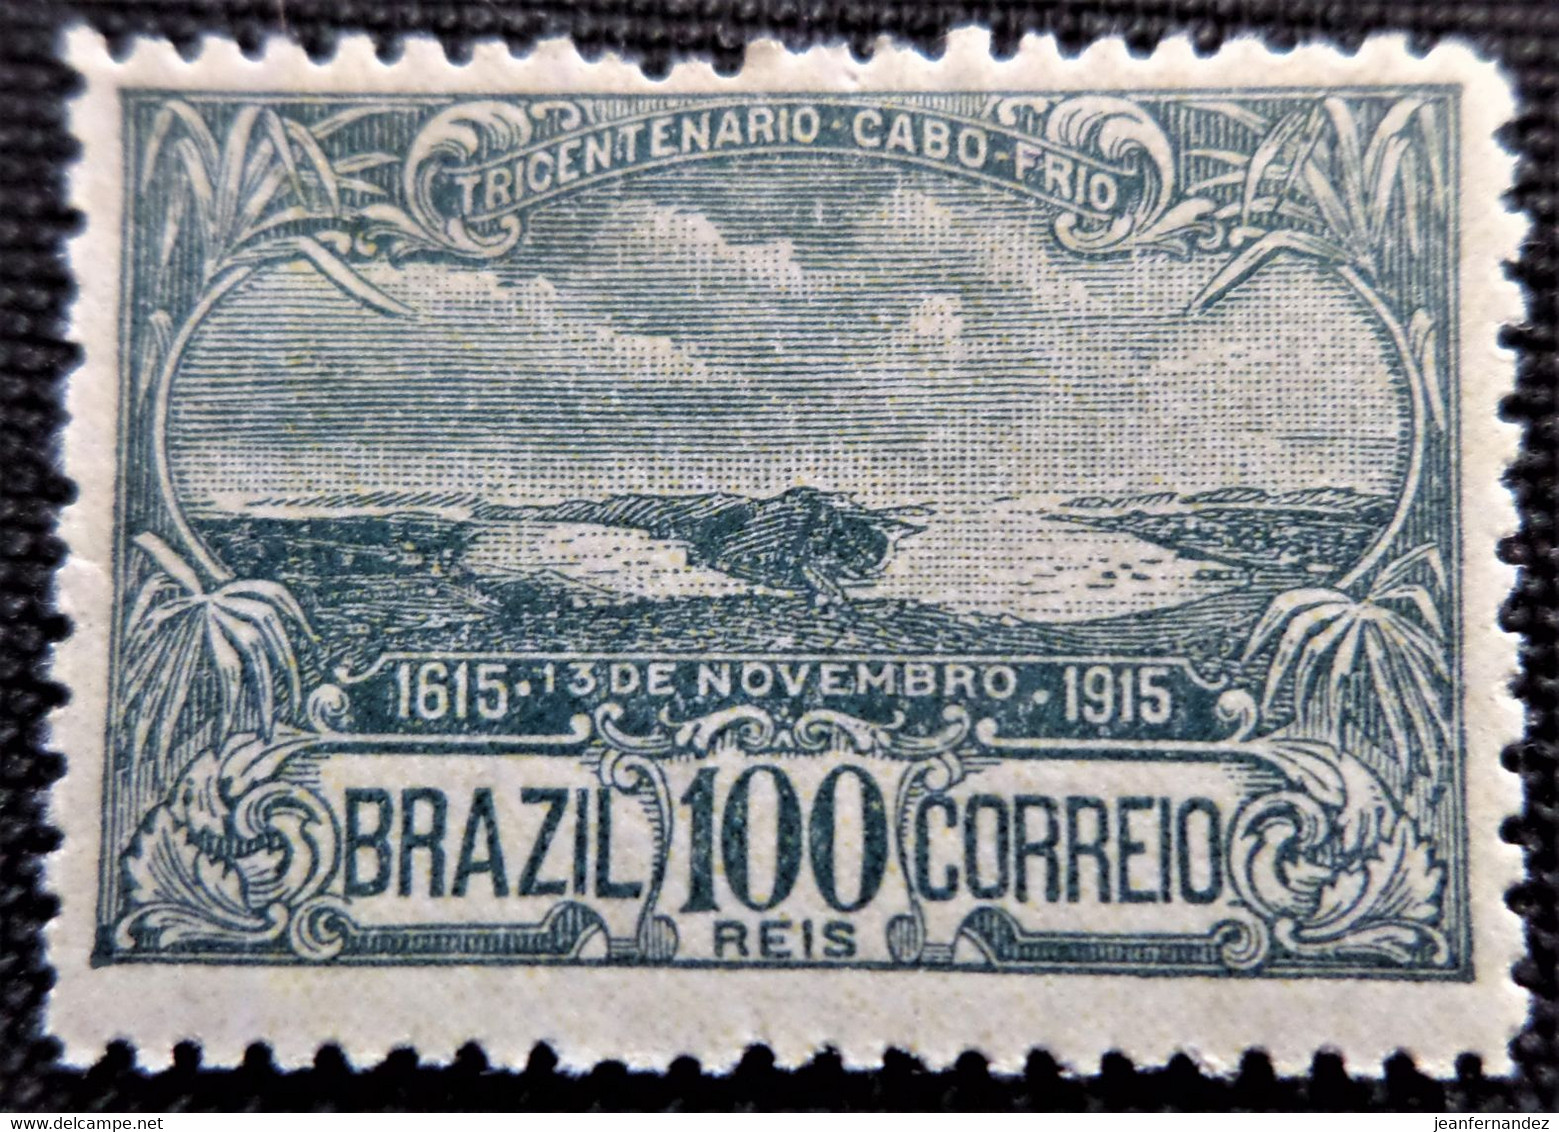 Timbre Du Brésil 1915  300th Anniversary Of The Founding Of Cabo Frio Stampworld N° 197 Neuf Avec Trace De Charnière - Ongebruikt